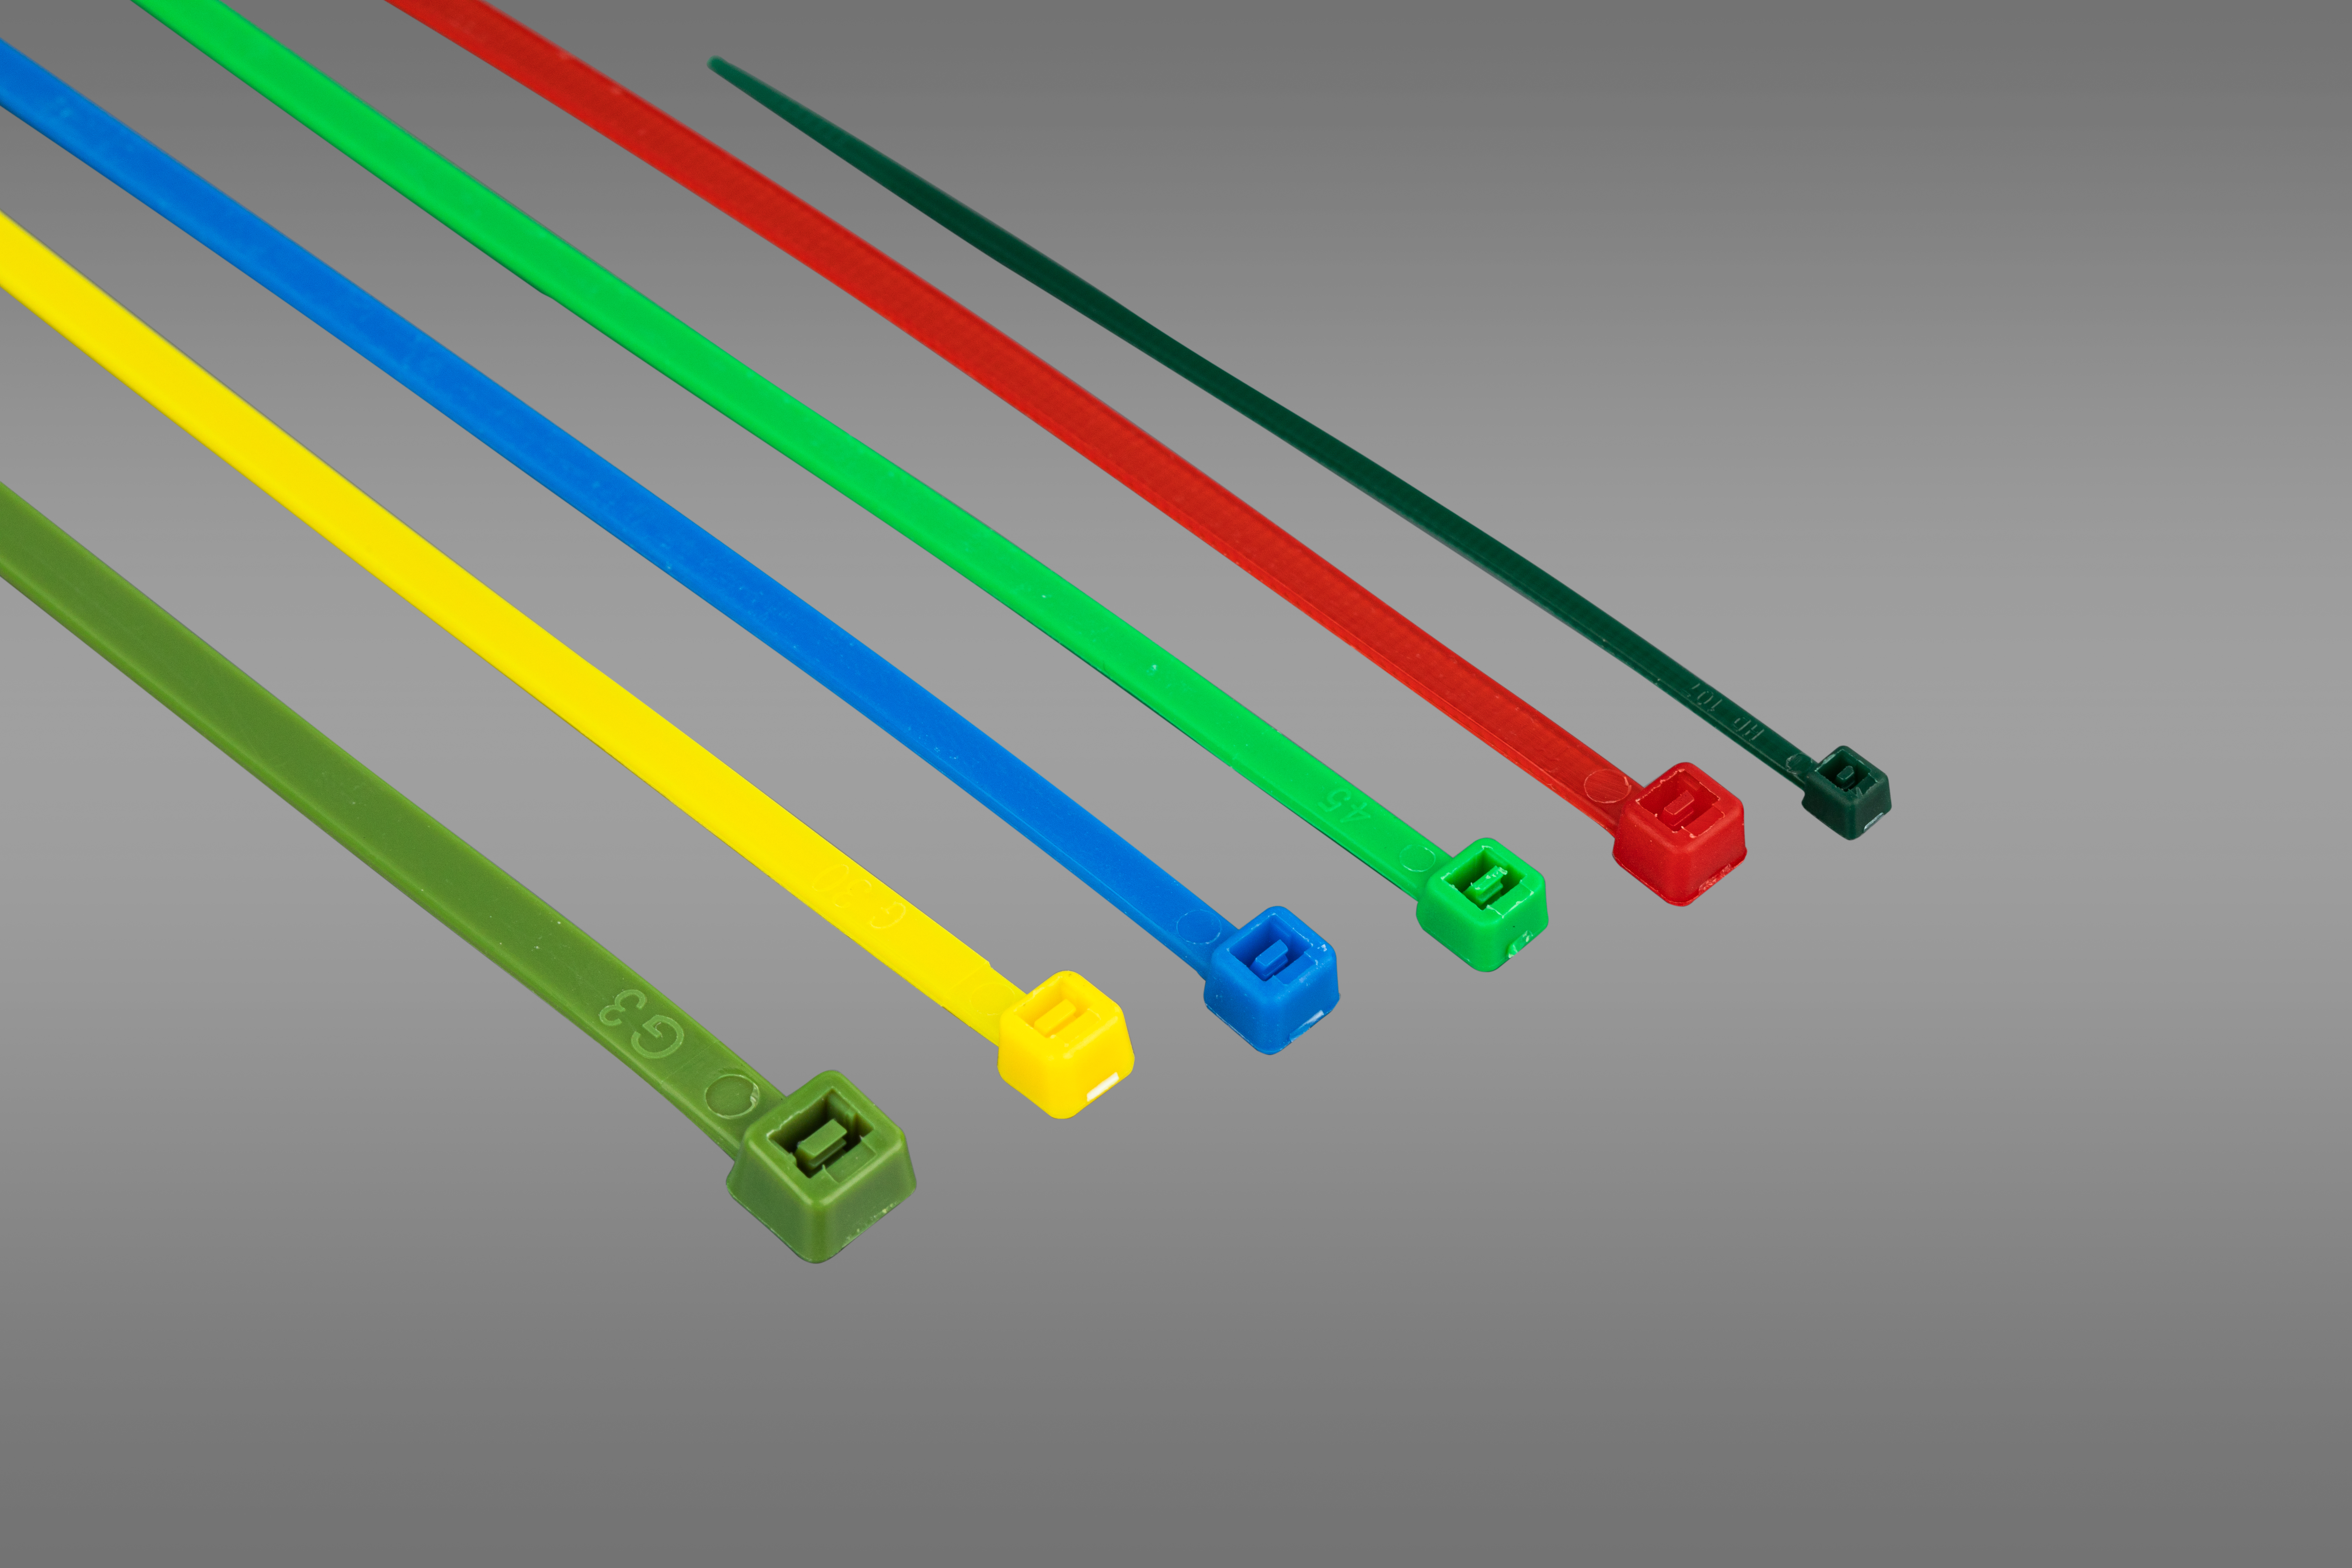 Nail Clips Modified for Organizing Wires in Latest News